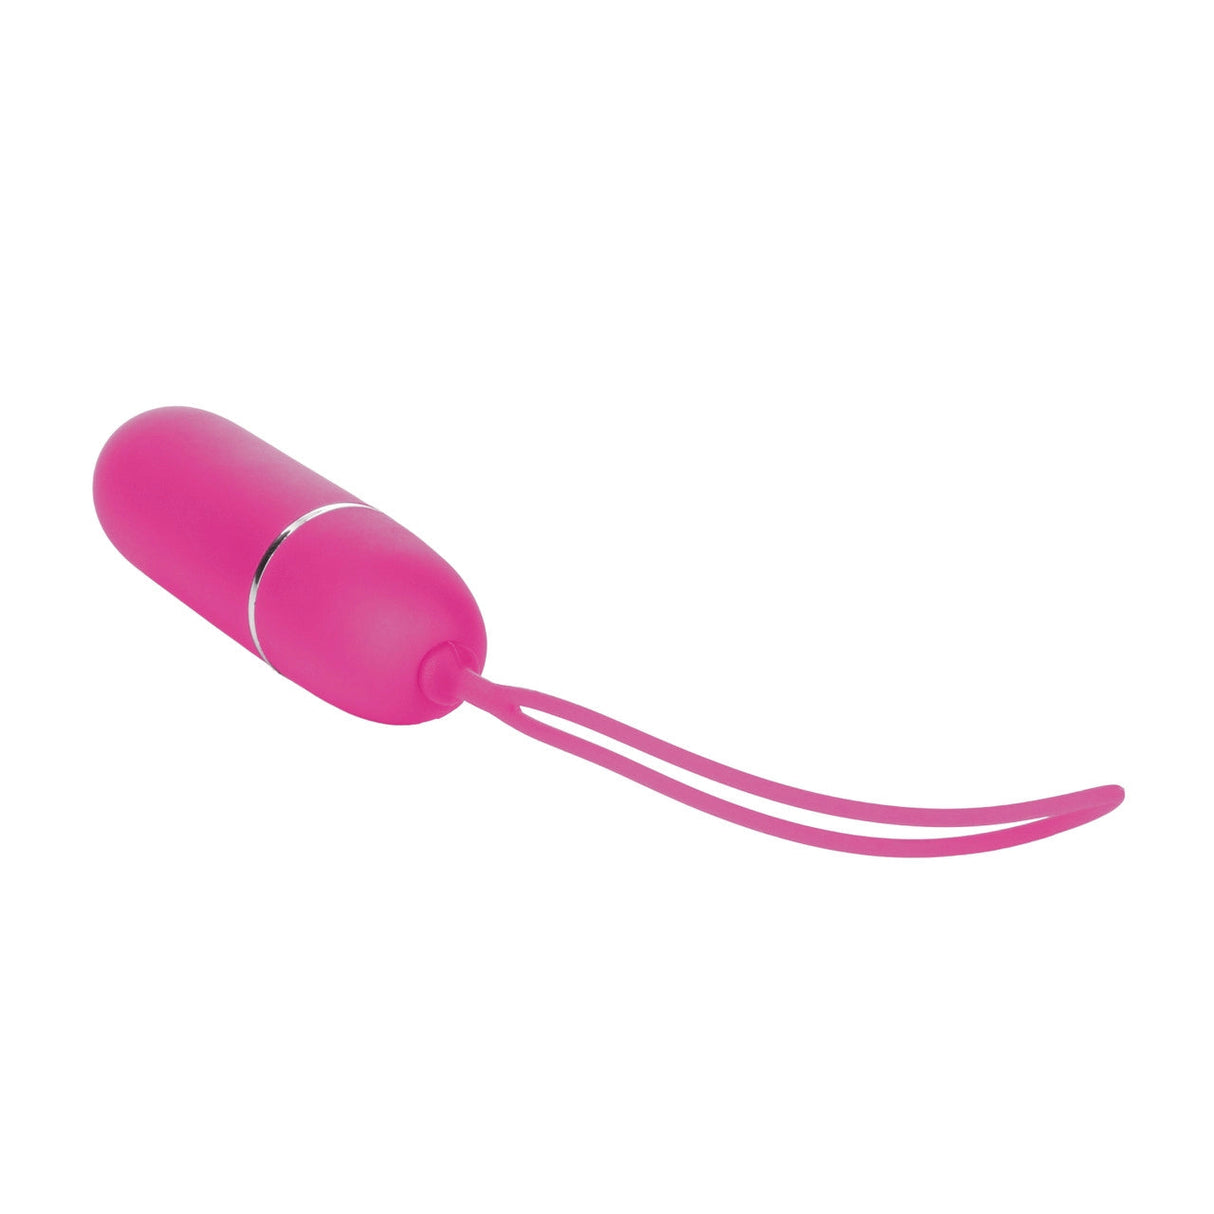 Posh 7 Function Lovers Remote Vibrating Bullet